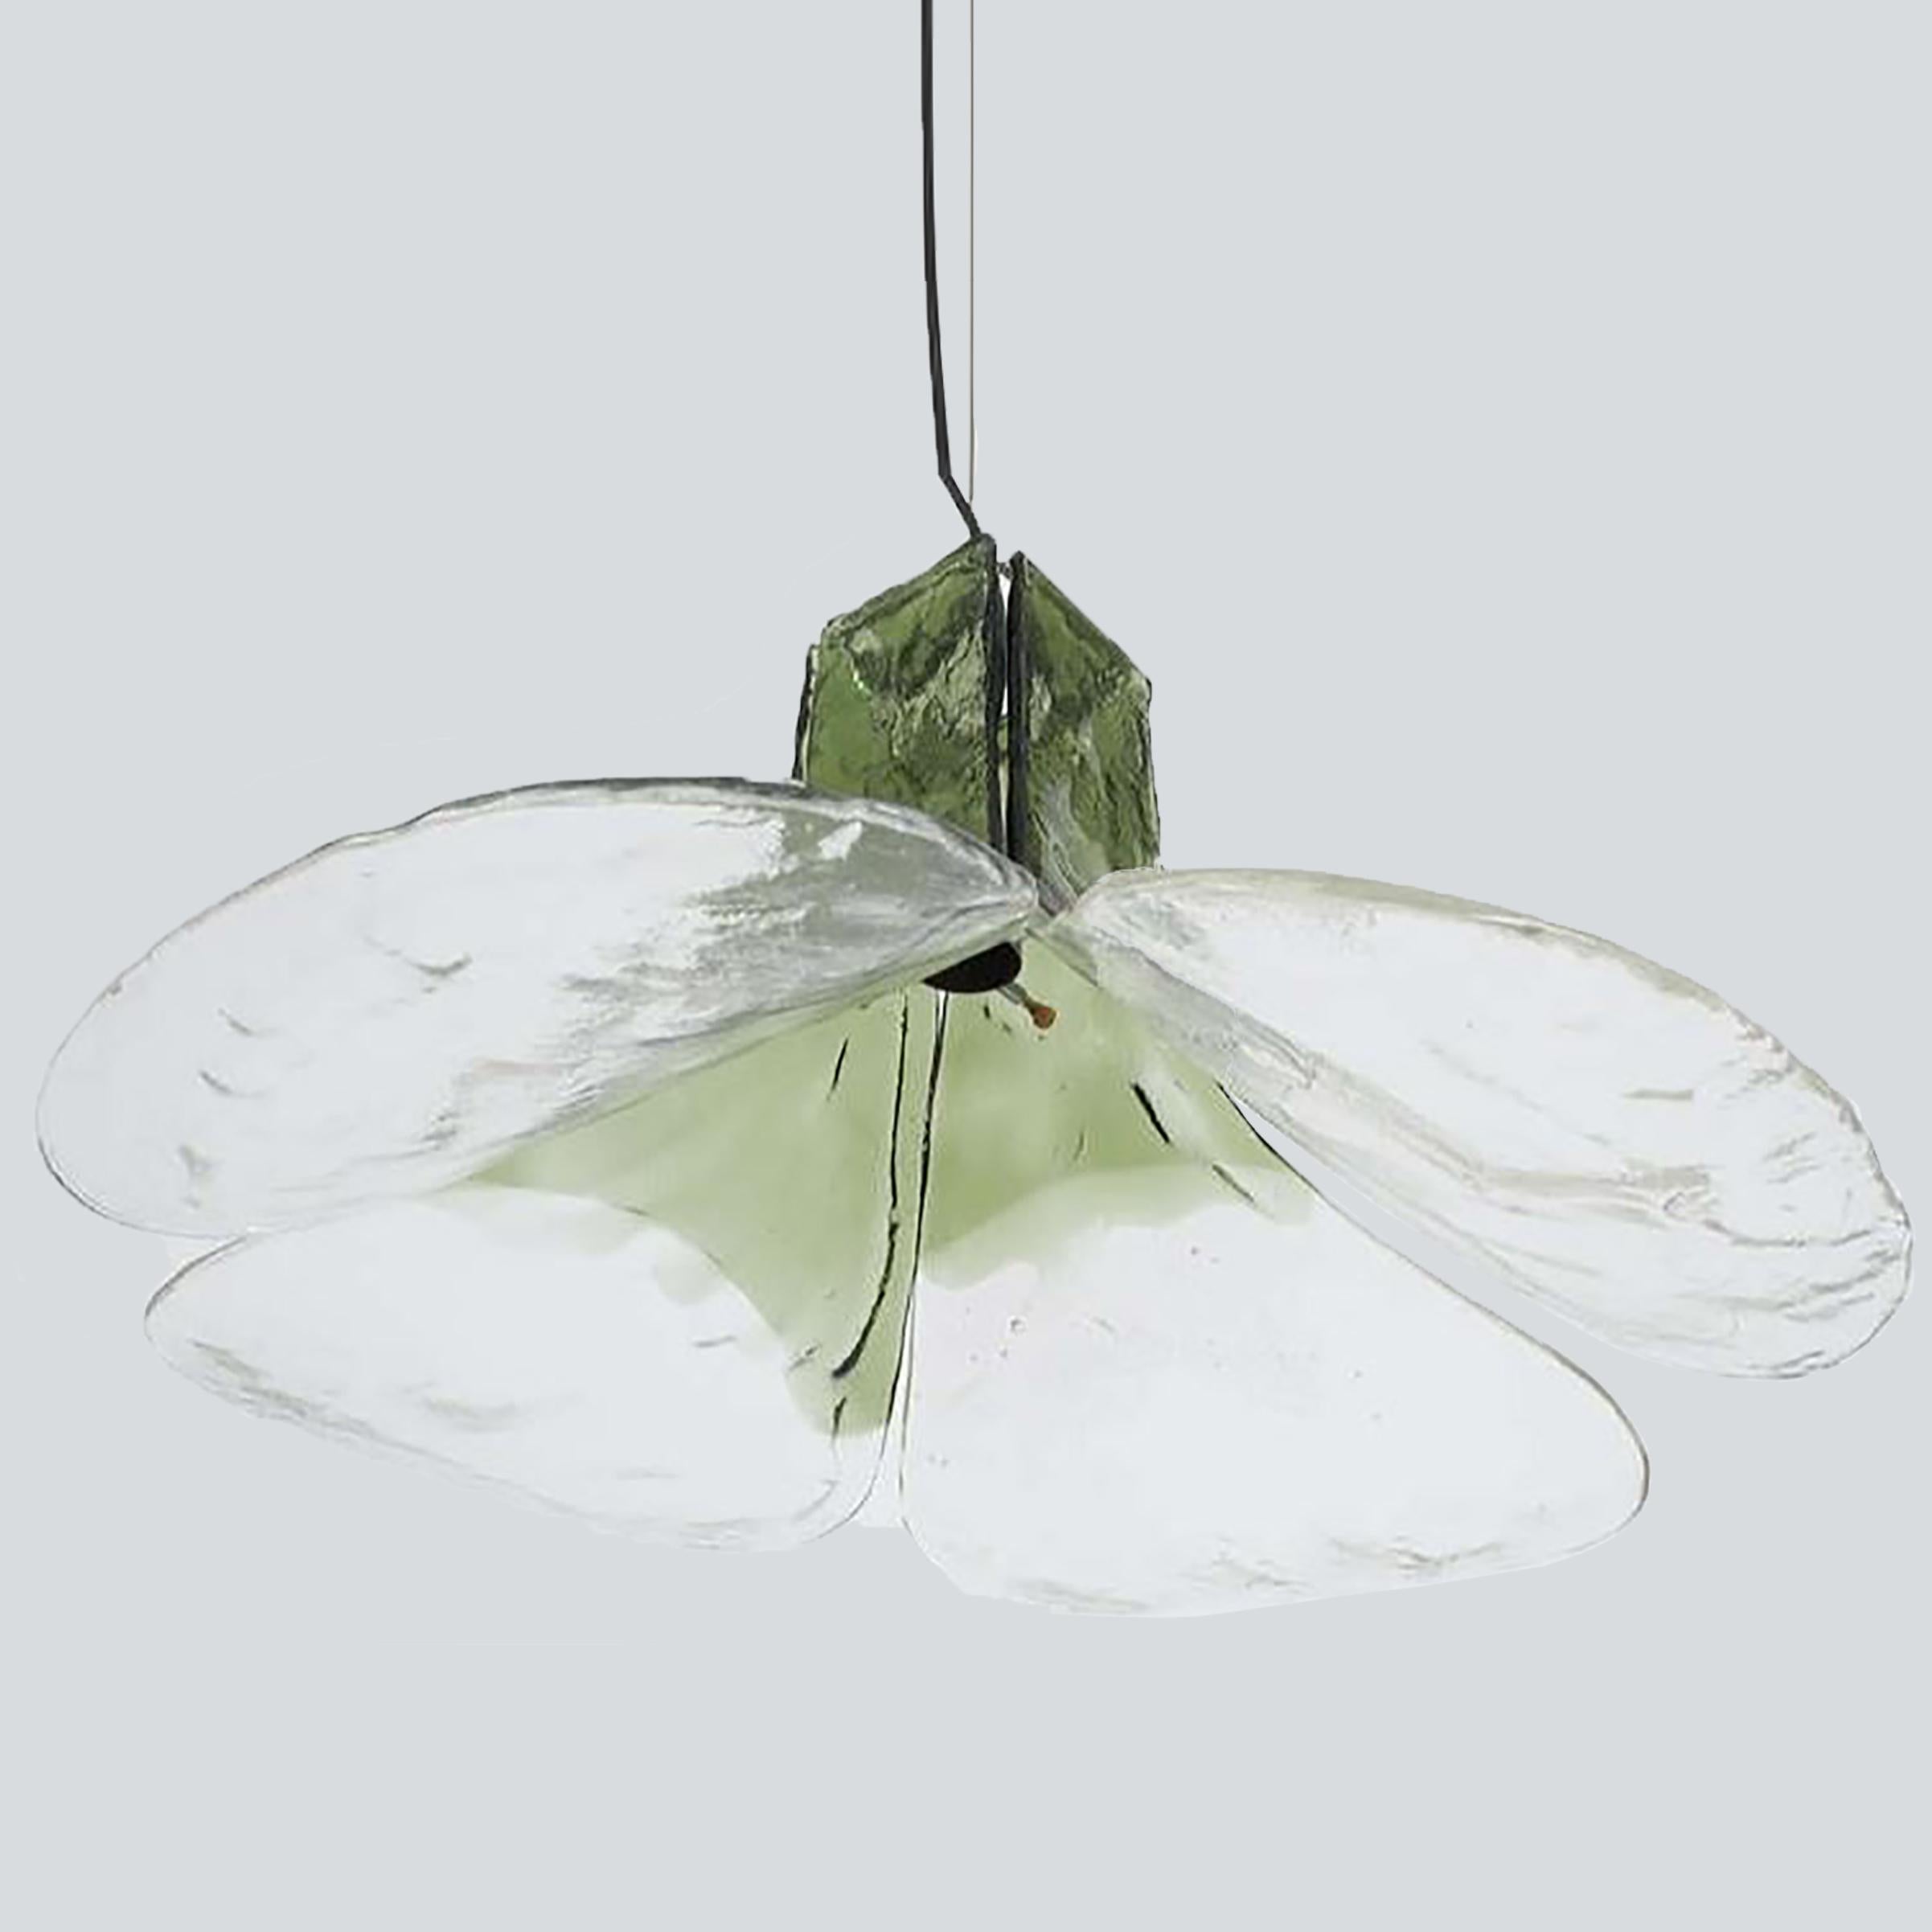 Pendant lamps model LS185 by Carlo Nason for Mazzega.
Four crystal clear and green leaves compose this beautiful piece made in thick handmade Murano glass.

Measures: H 16.93” (43 cm), D 23.62